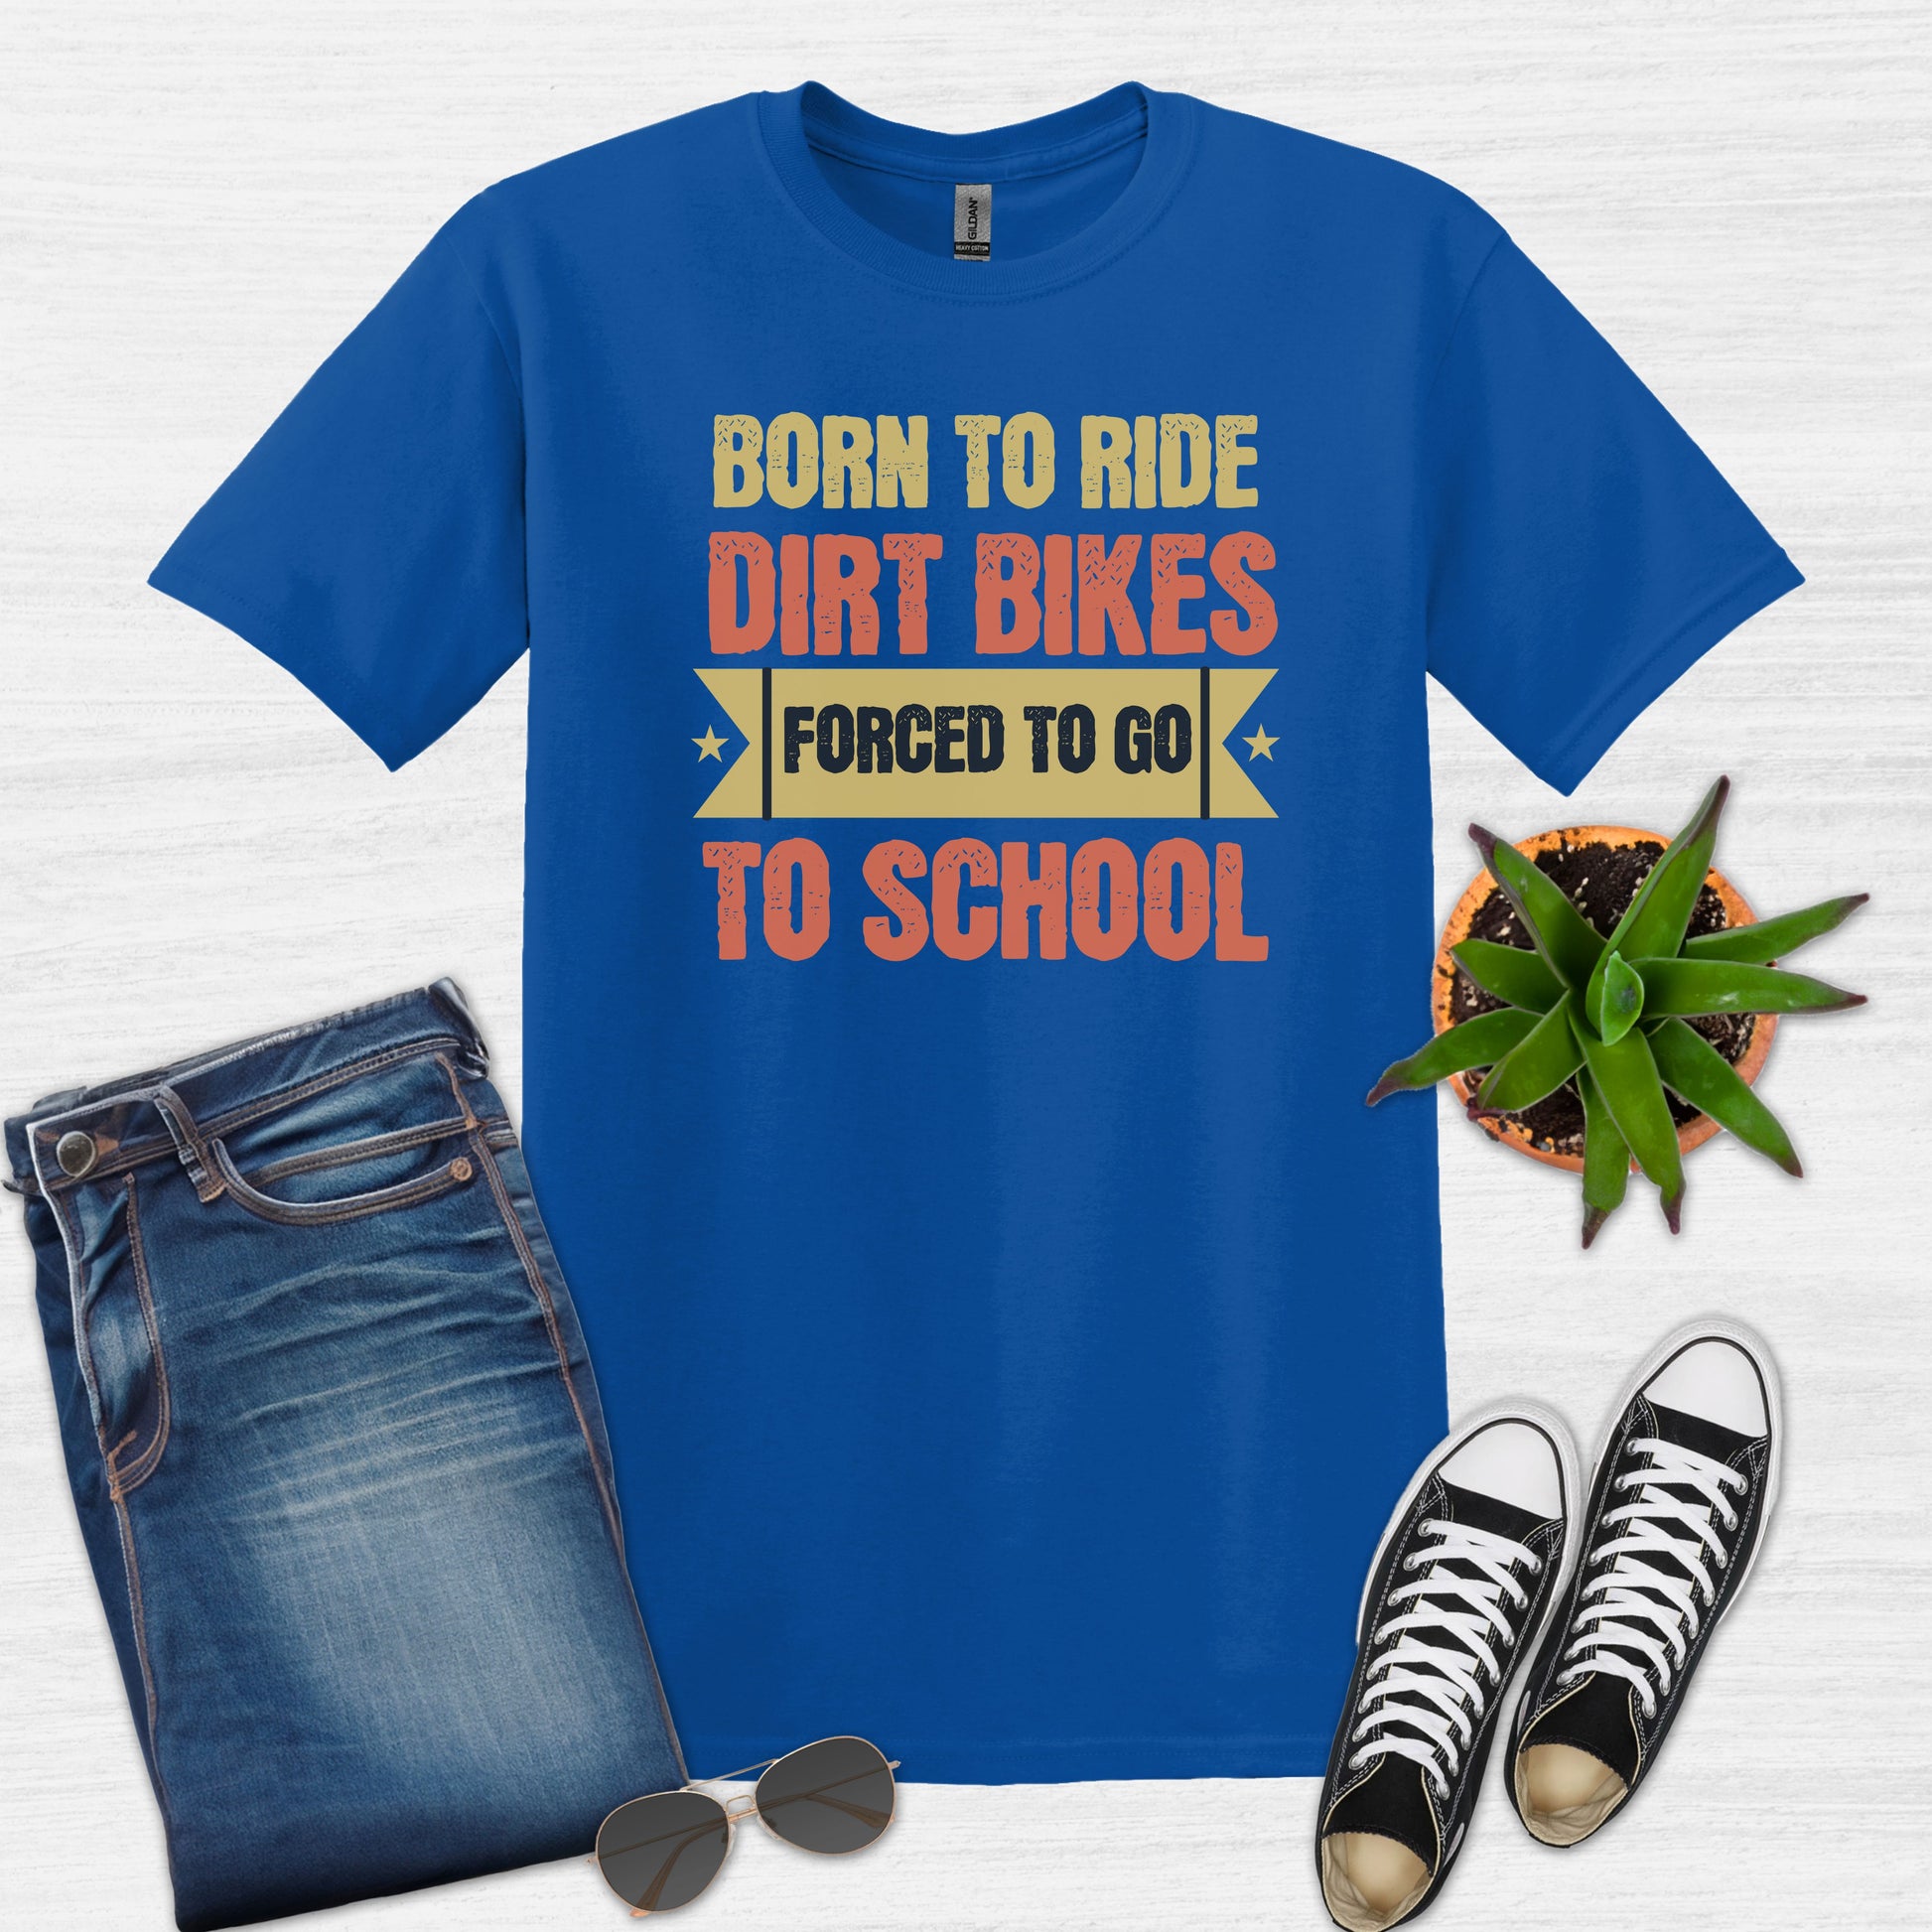 Bike Bliss Born to Ride Dirt Bikes Forced to go to School T-shirt for Men Royal Blue